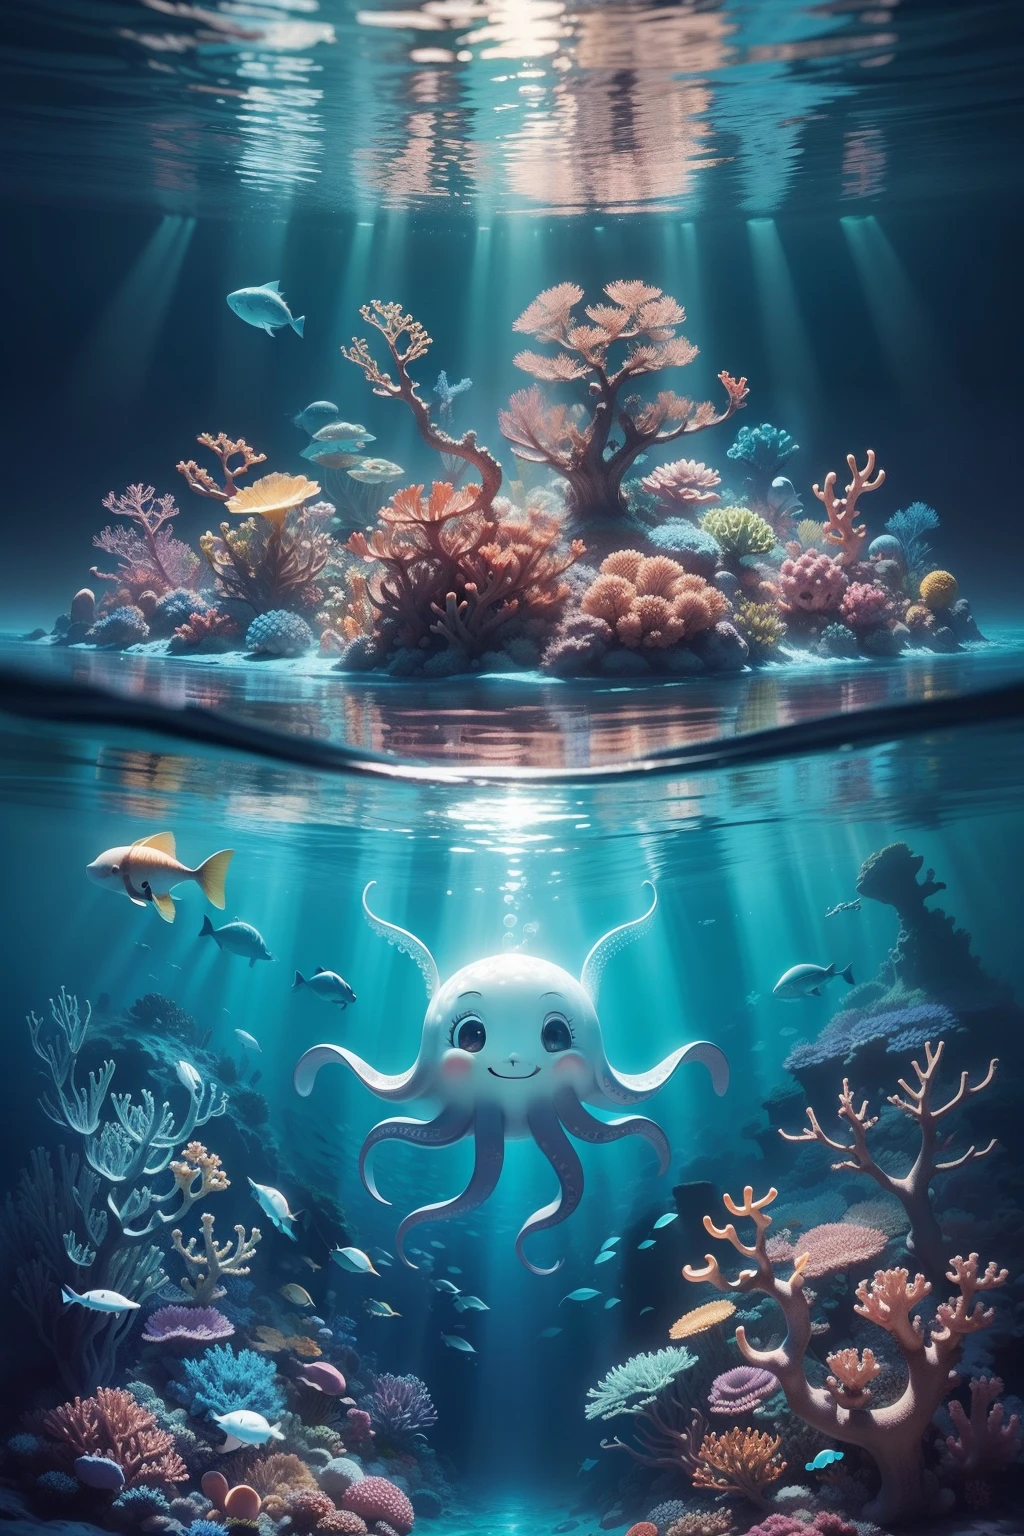 Please create a charming picture for a children's book. In the center of the image, there is a friendly octopus with eight tentacles, smiling happily. He's swimming at the bottom of the ocean, surrounded by colorful corals that rise up like magical towers. Playful little fish swim around the octopus, as if participating in an underwater dance. The water is crystal clear and gently shimmers with sunlight that penetrates from the waves at the surface. I want this image to be full of vibrant color and convey the wonder and beauty of the underwater world to children as young as eight.